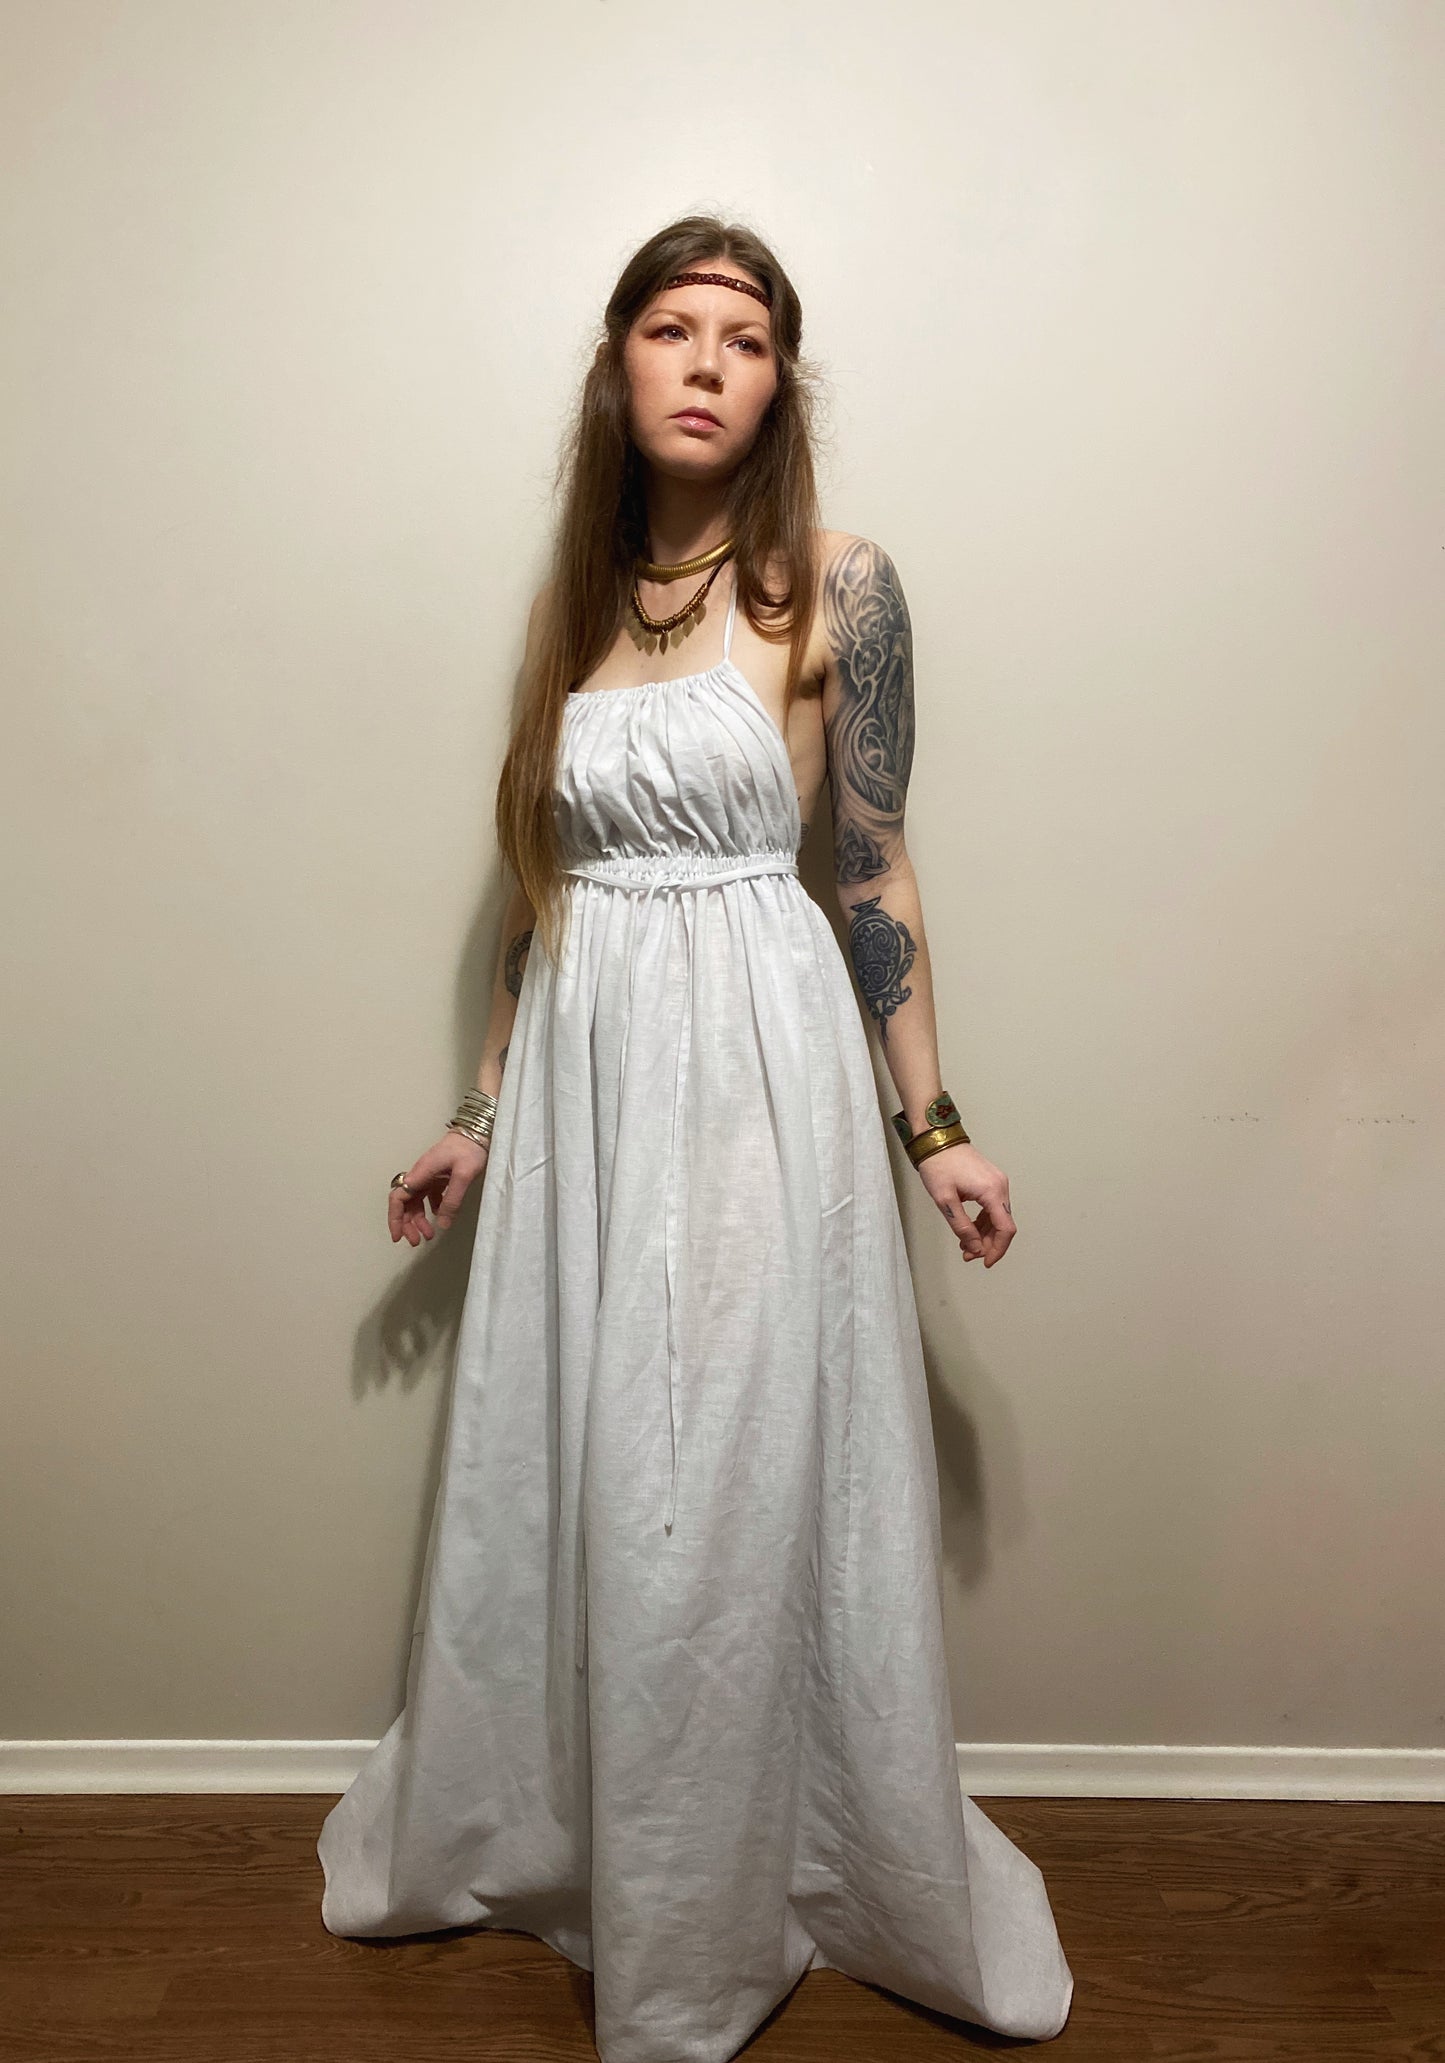 The Artemis Gown